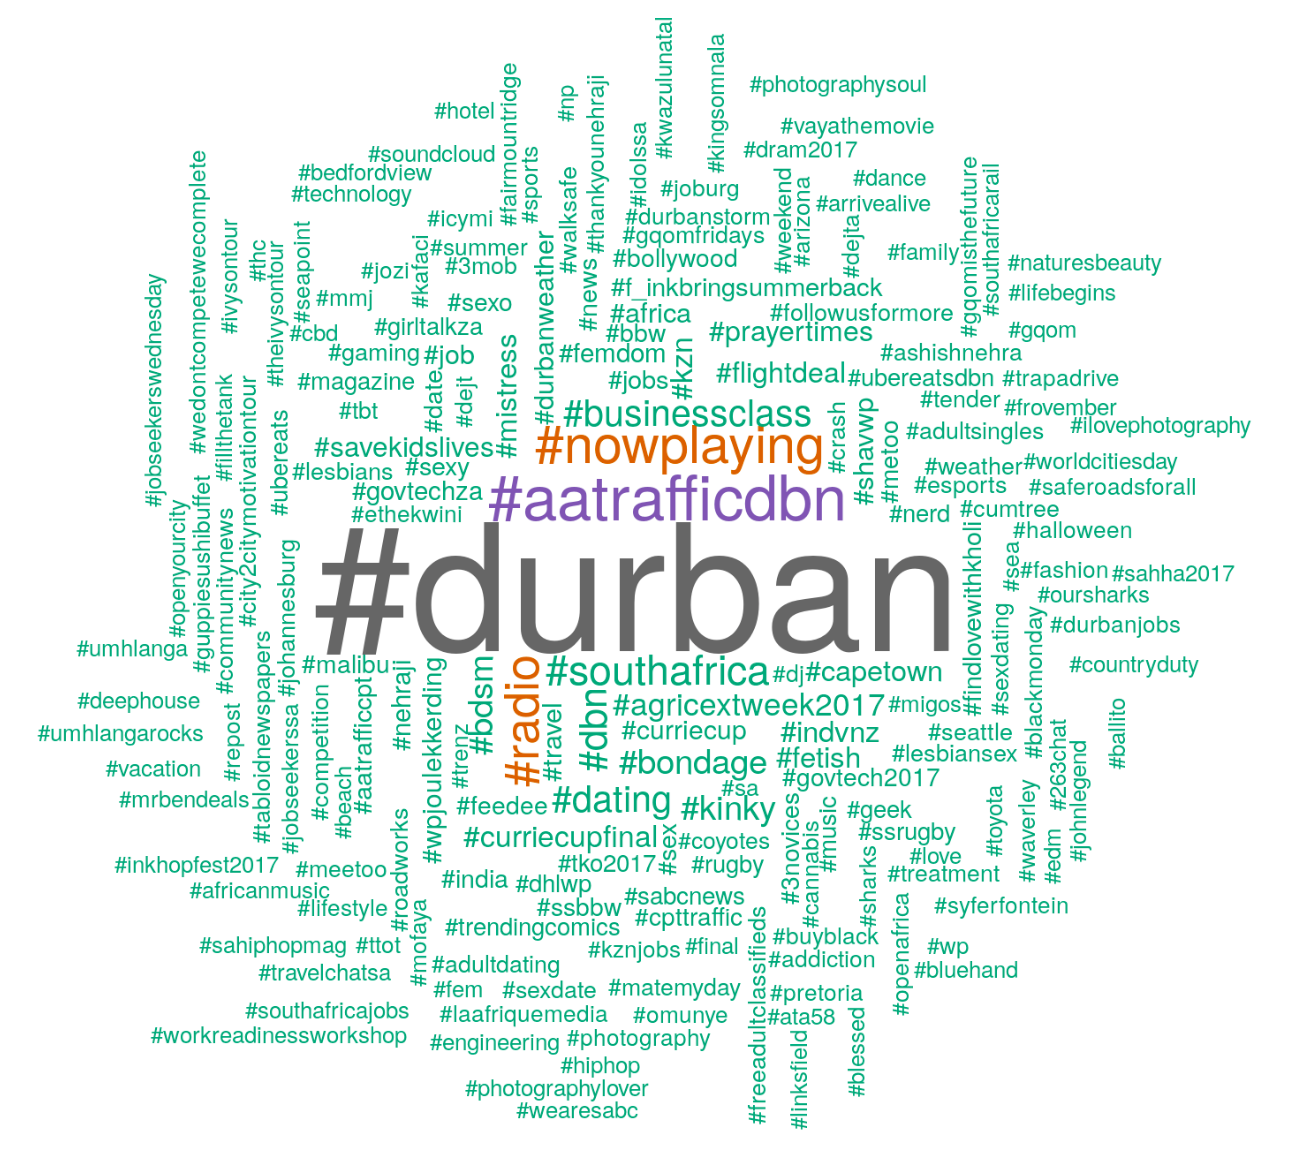 Wordcloud of terms mentioned in association with Durban on Twitter.